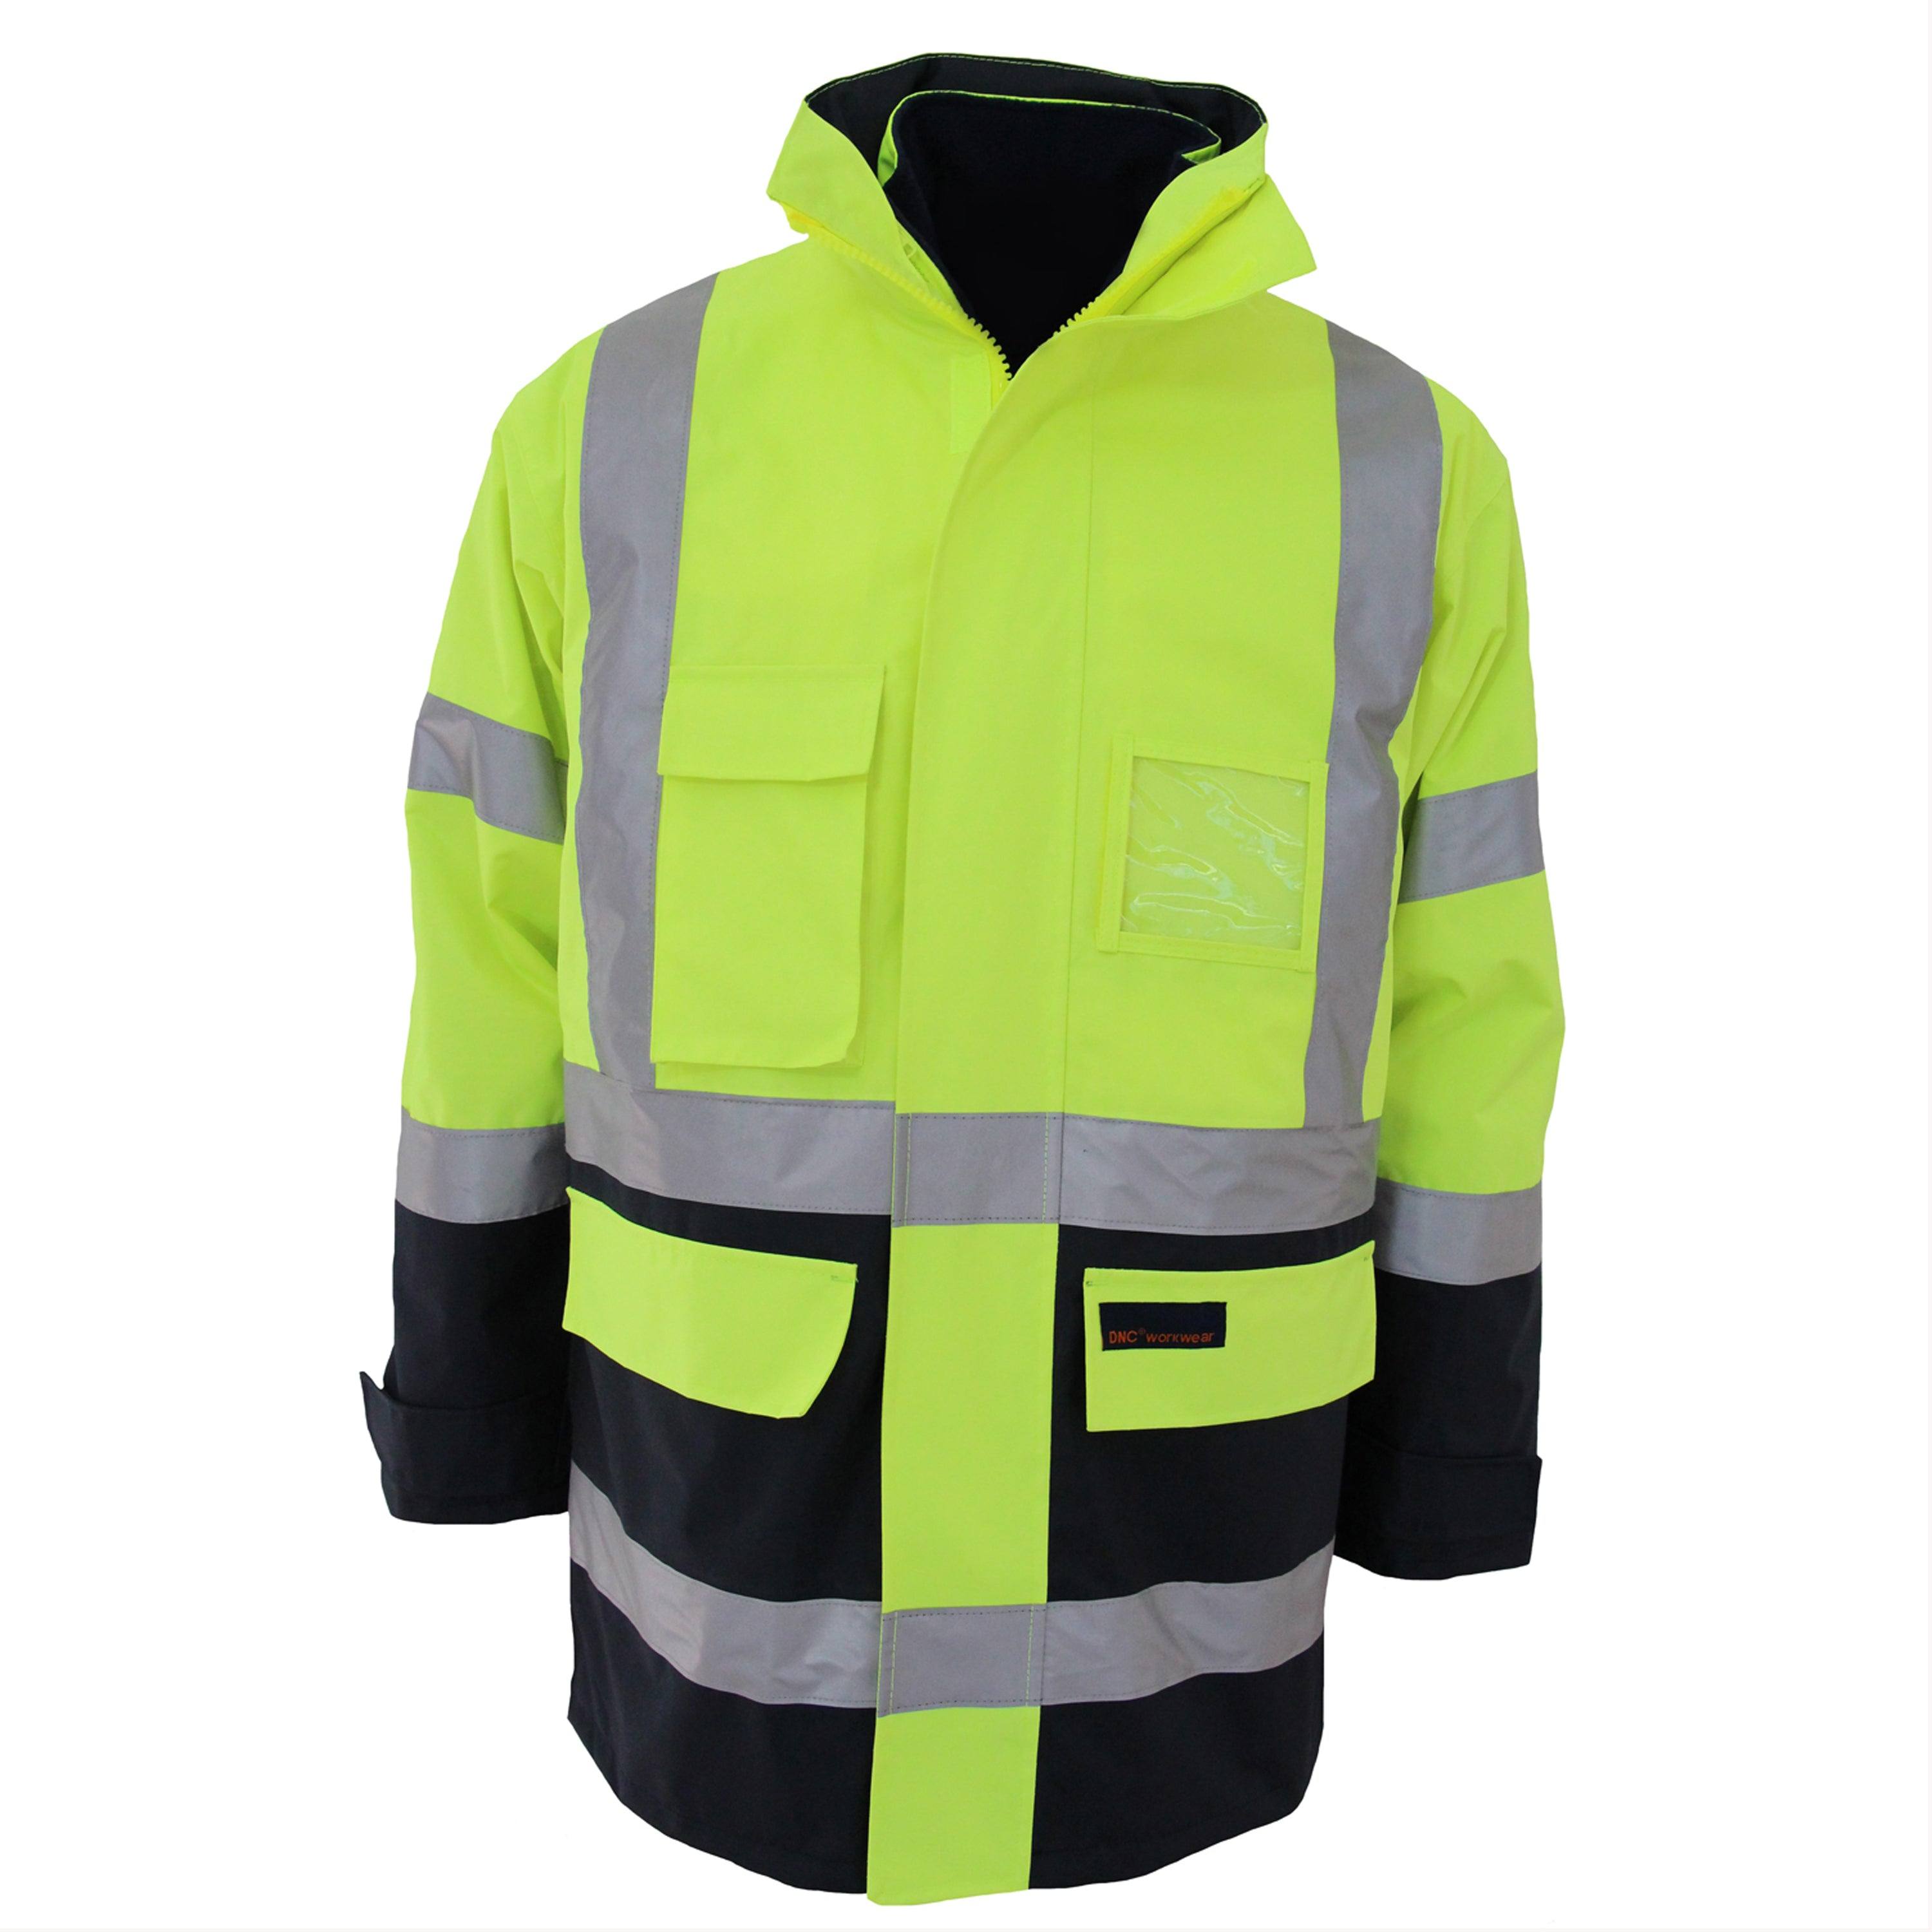 HiVis "H" Pattern 2T Biomotion Tape 6 in 1 Jacket 3964 - Printibly